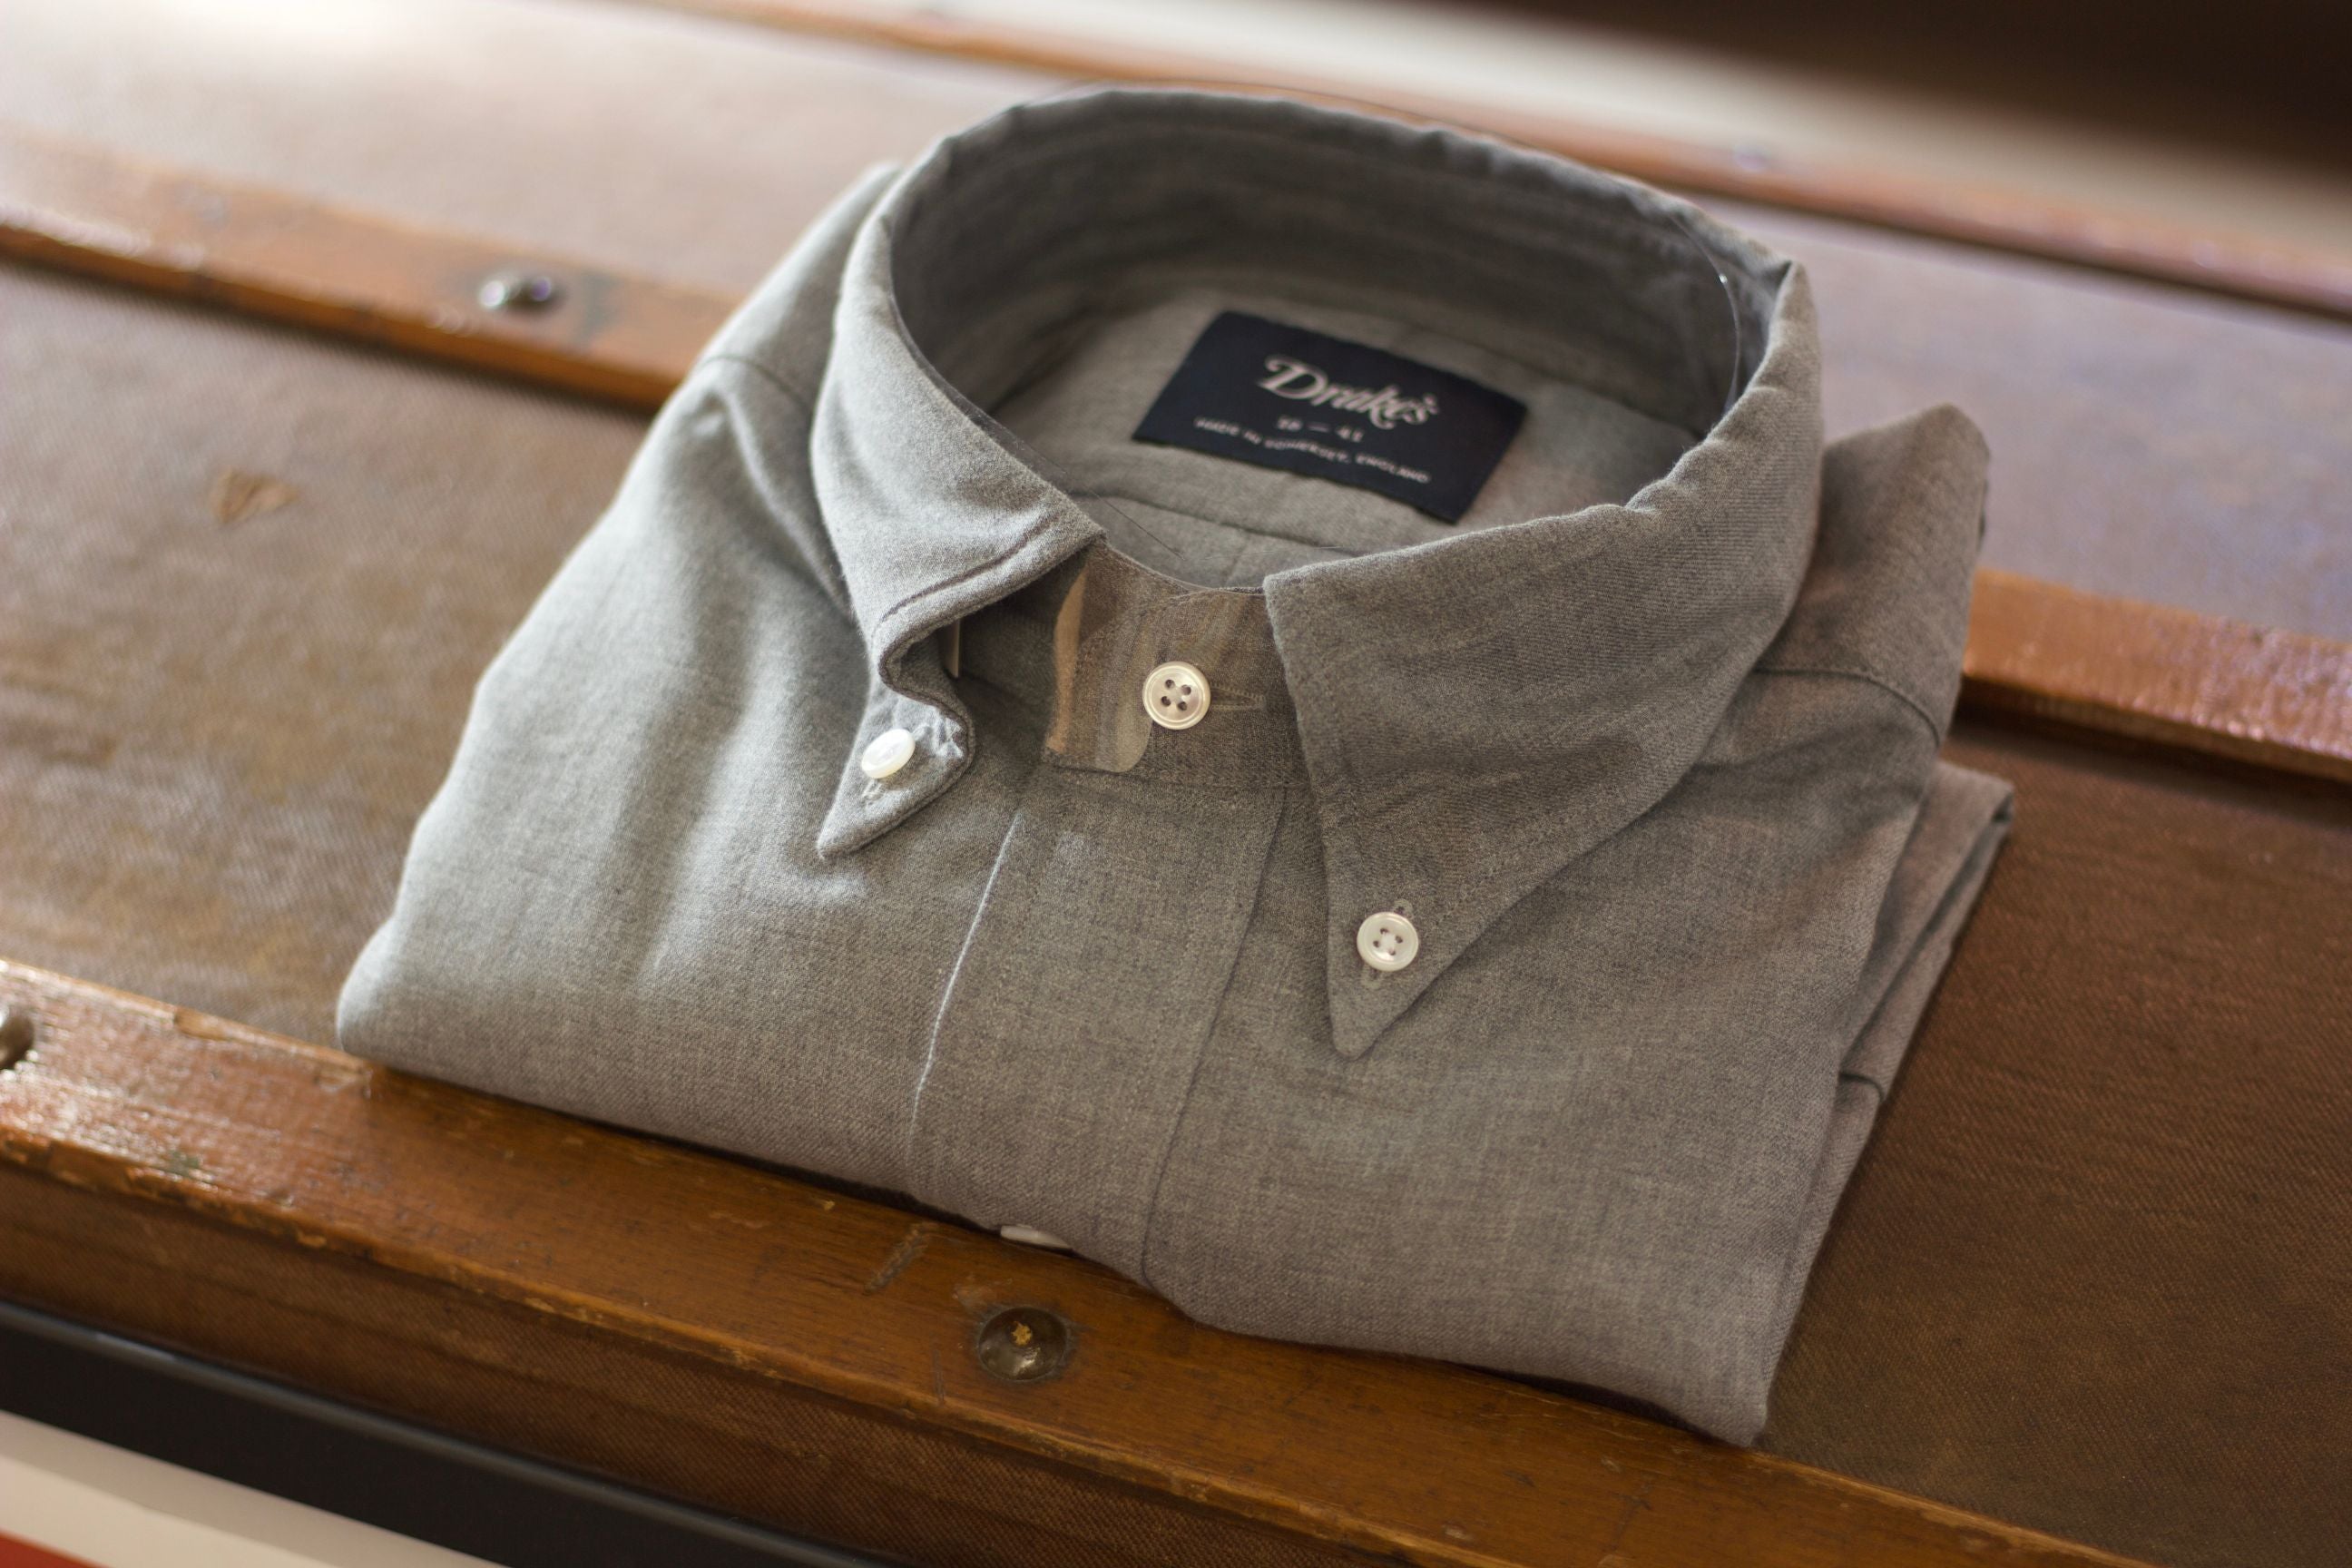 The button-down collar shirt is an enduring icon of menswear, which looks as good now as it did a century ago. It's an item that's at the very heart of our brand, and remains a cornerstone of any wardrobe.